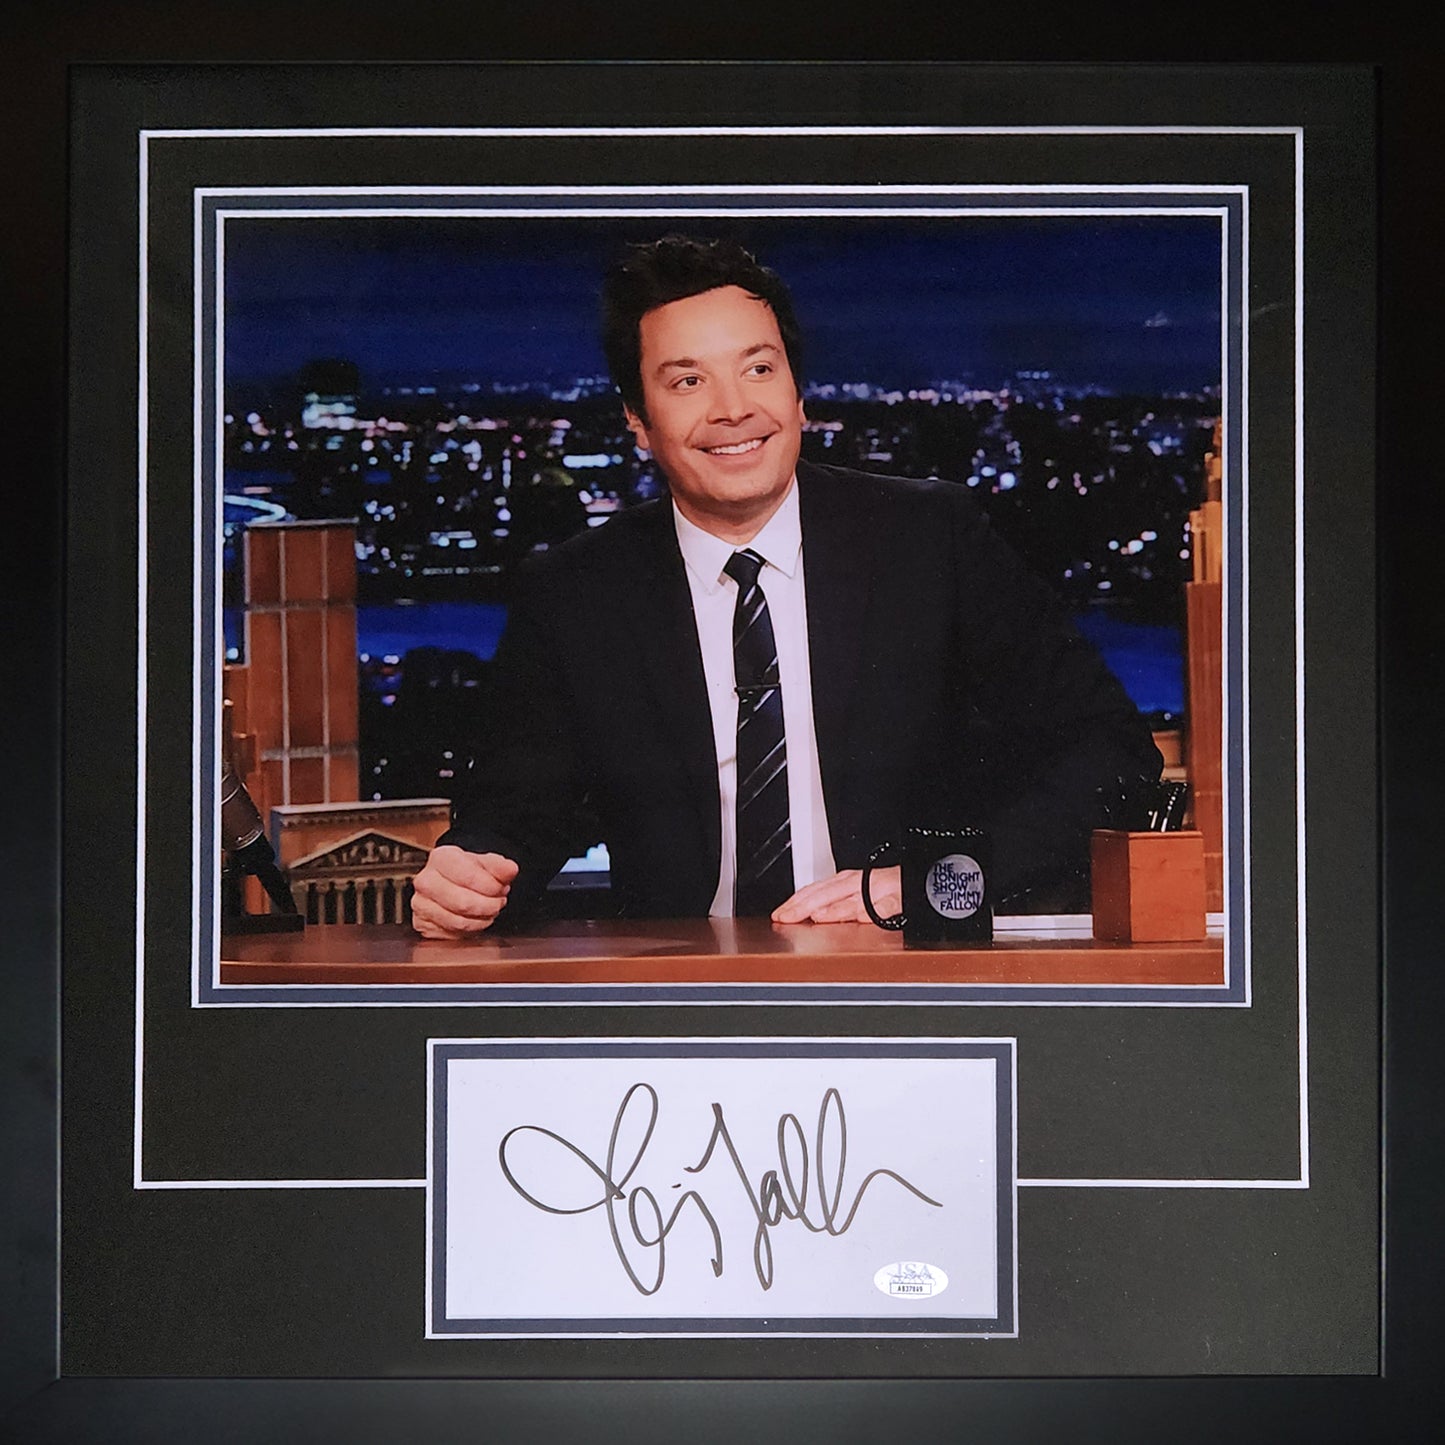 Jimmy Fallon Autographed The Tonight Show Deluxe Framed Piece with 11x14 Photo - JSA